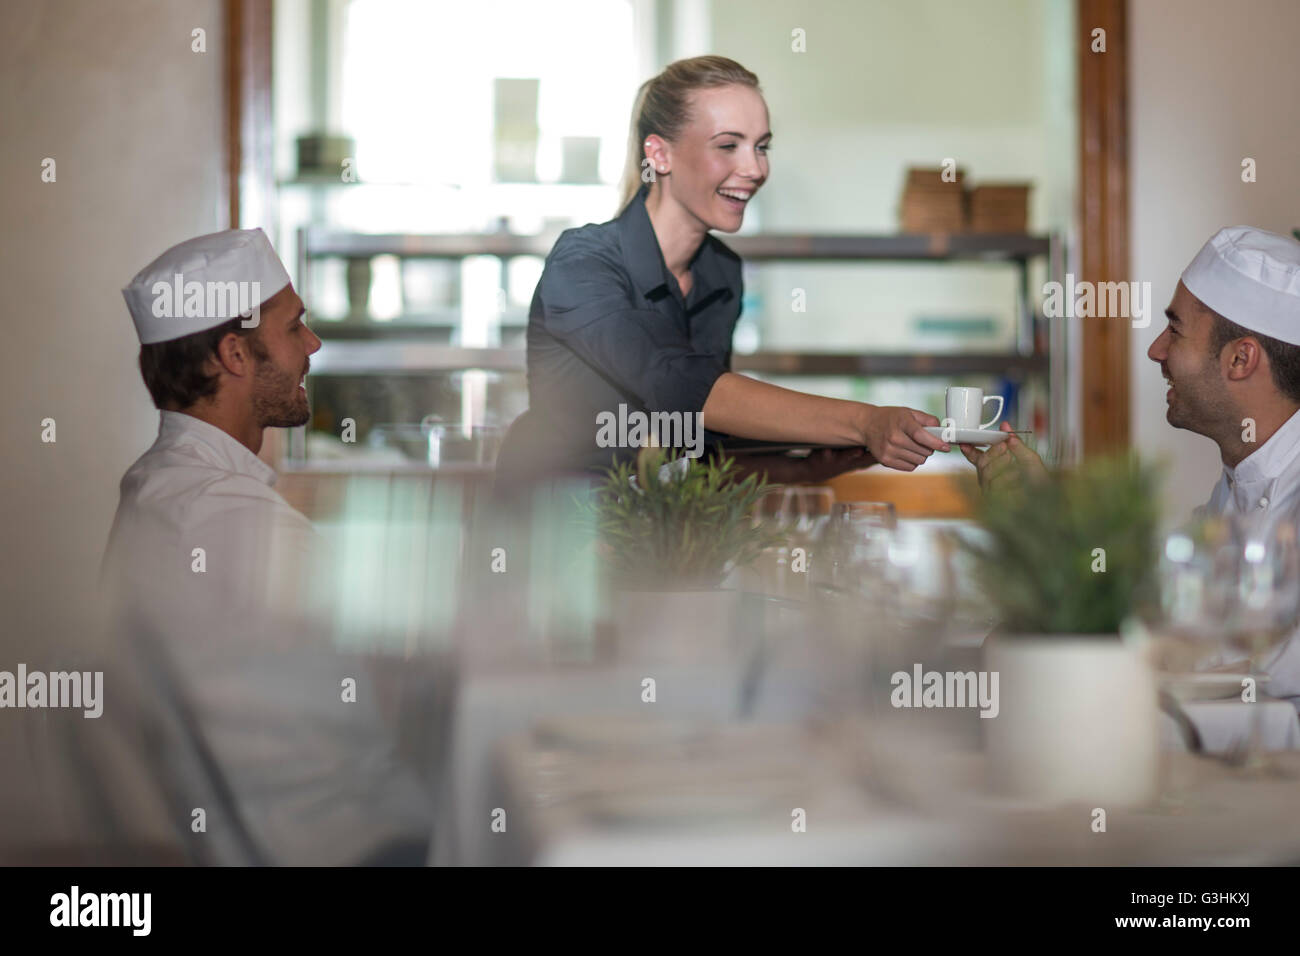 Waitress serving coffee to chefs at break time Stock Photo